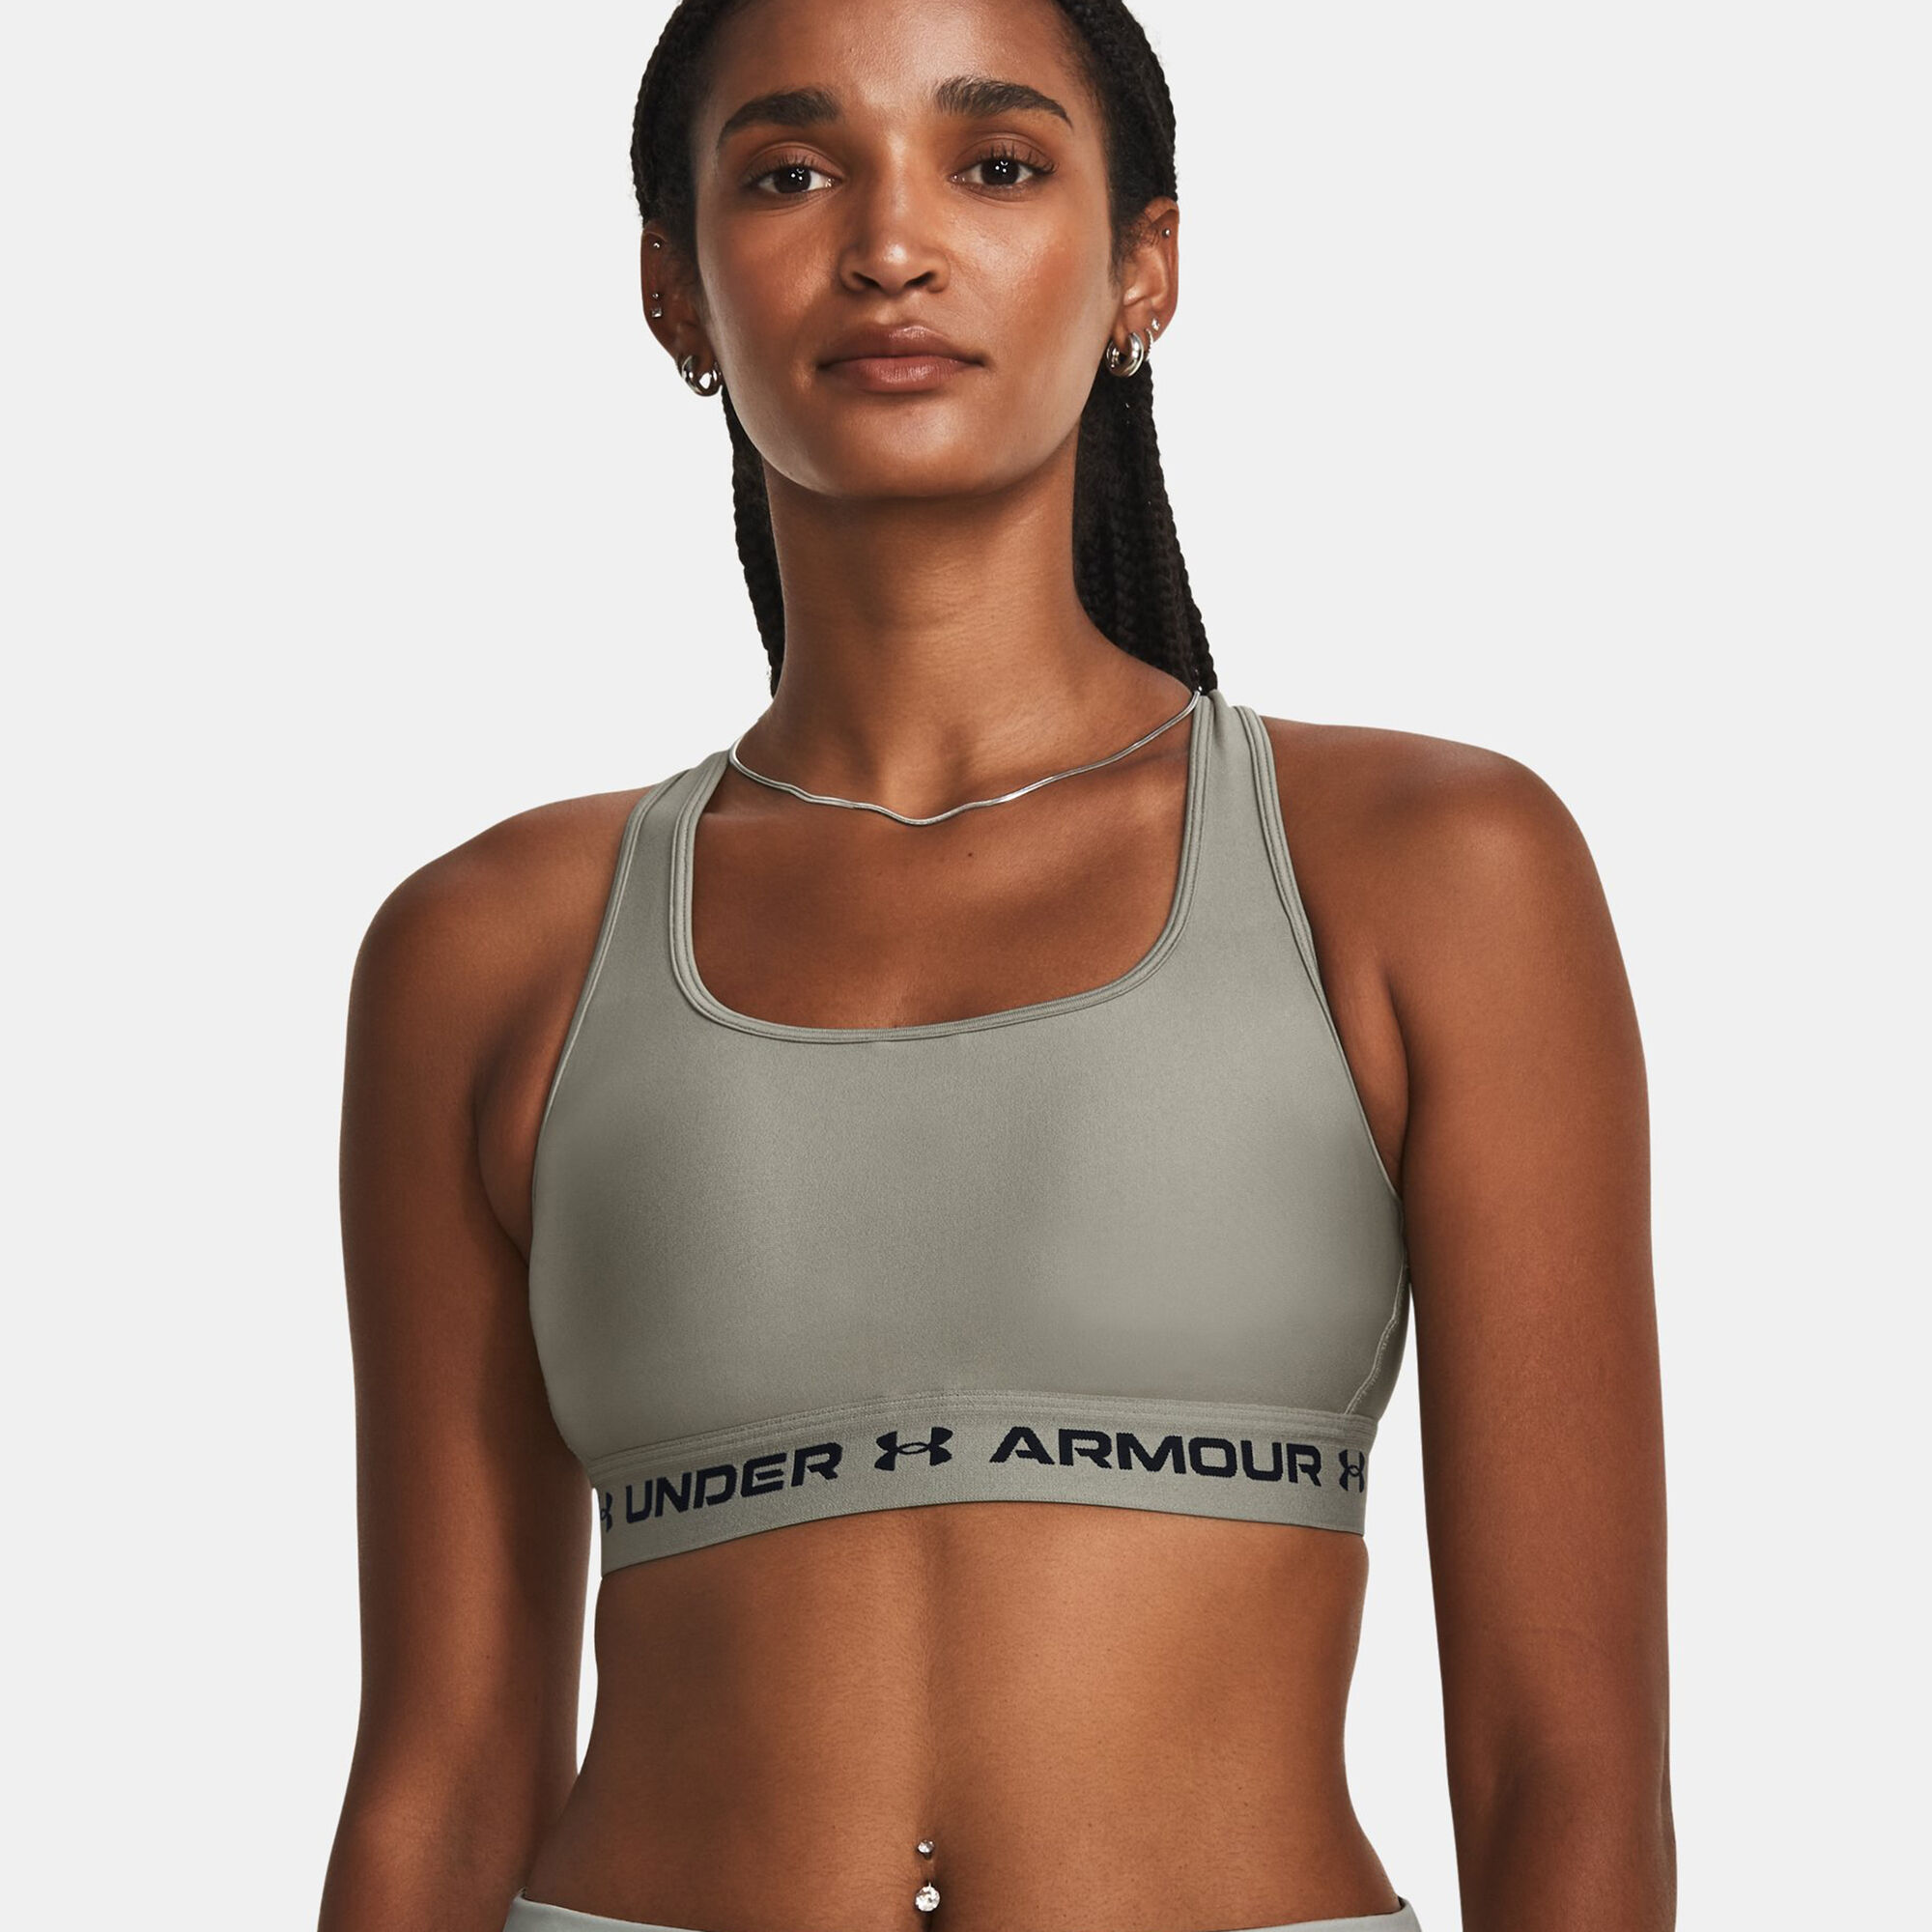 Under Armour Low Crossback Sports Bra for Ladies - Black - L